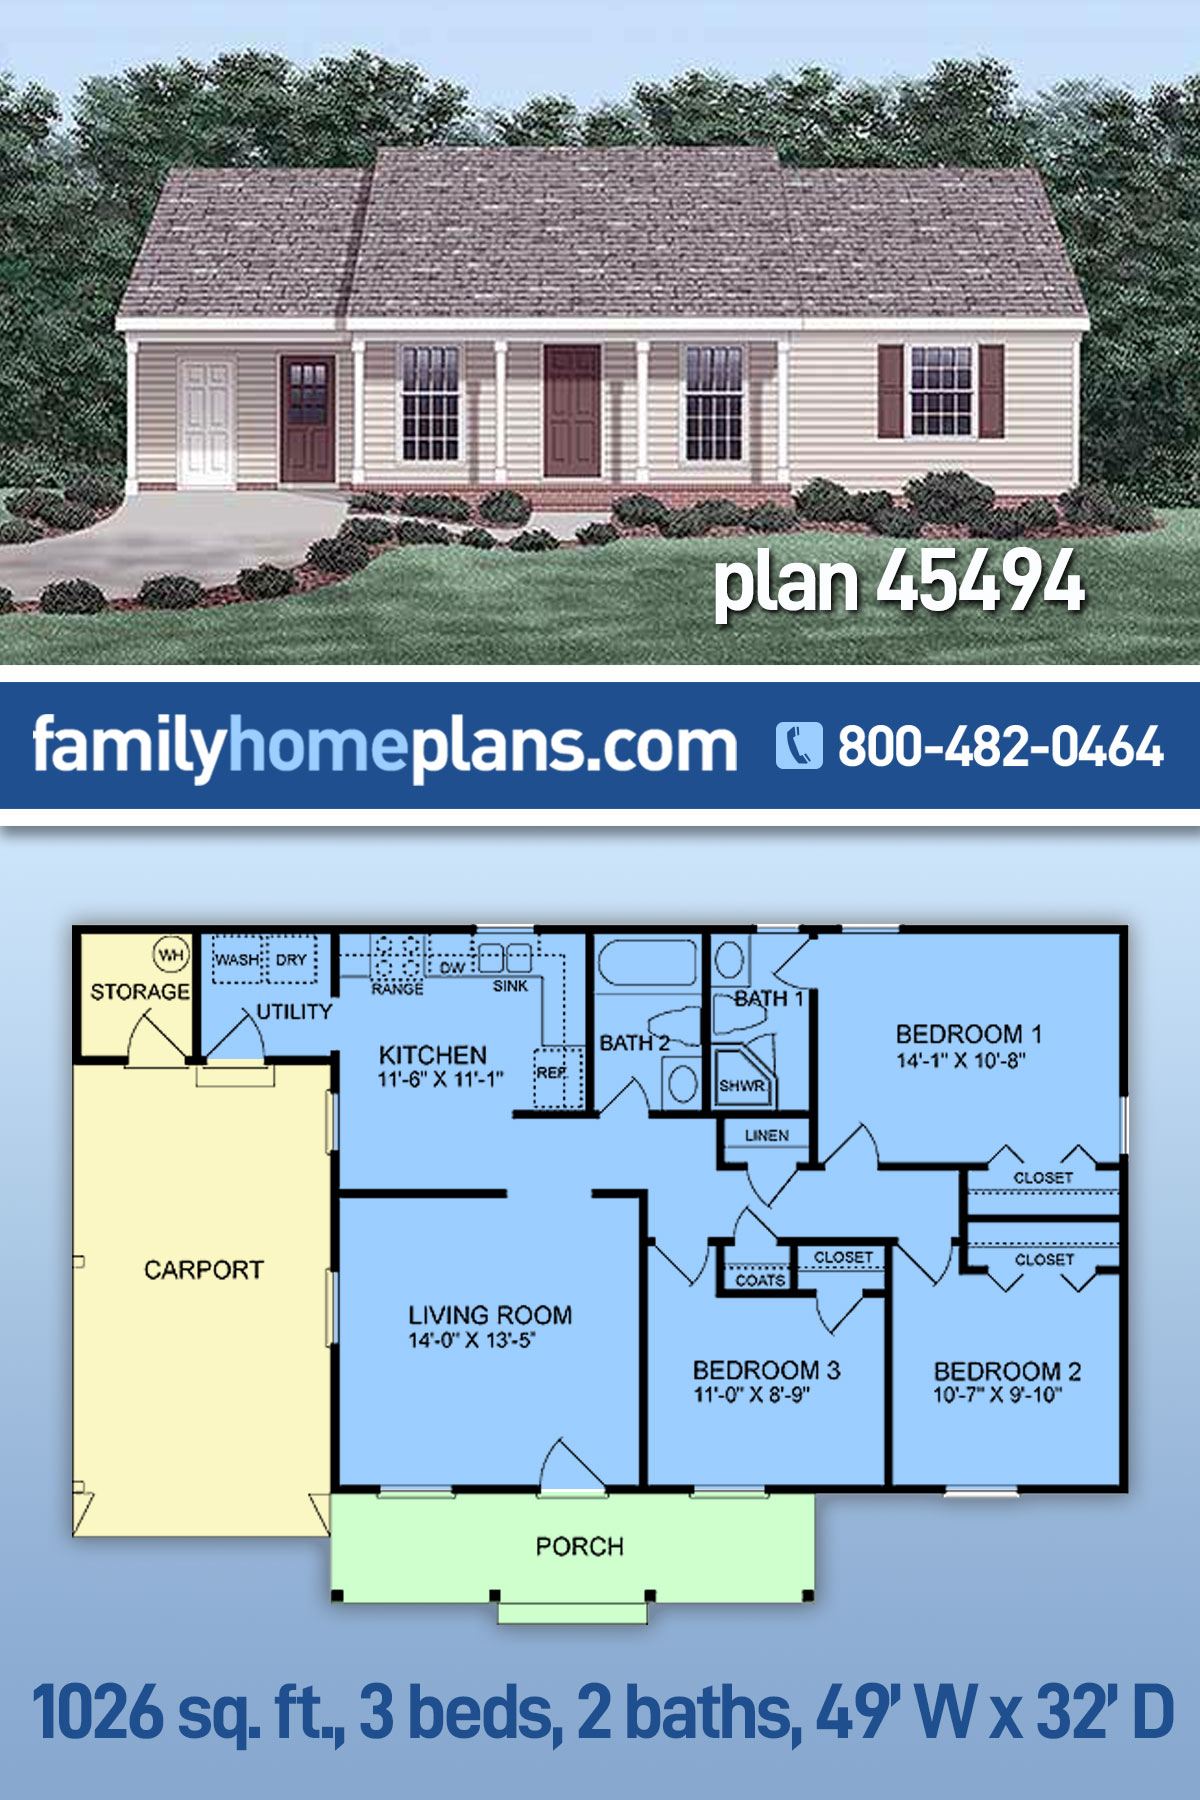 Ranch House Plan 45494 with 3 Beds, 2 Baths, 1 Car Garage